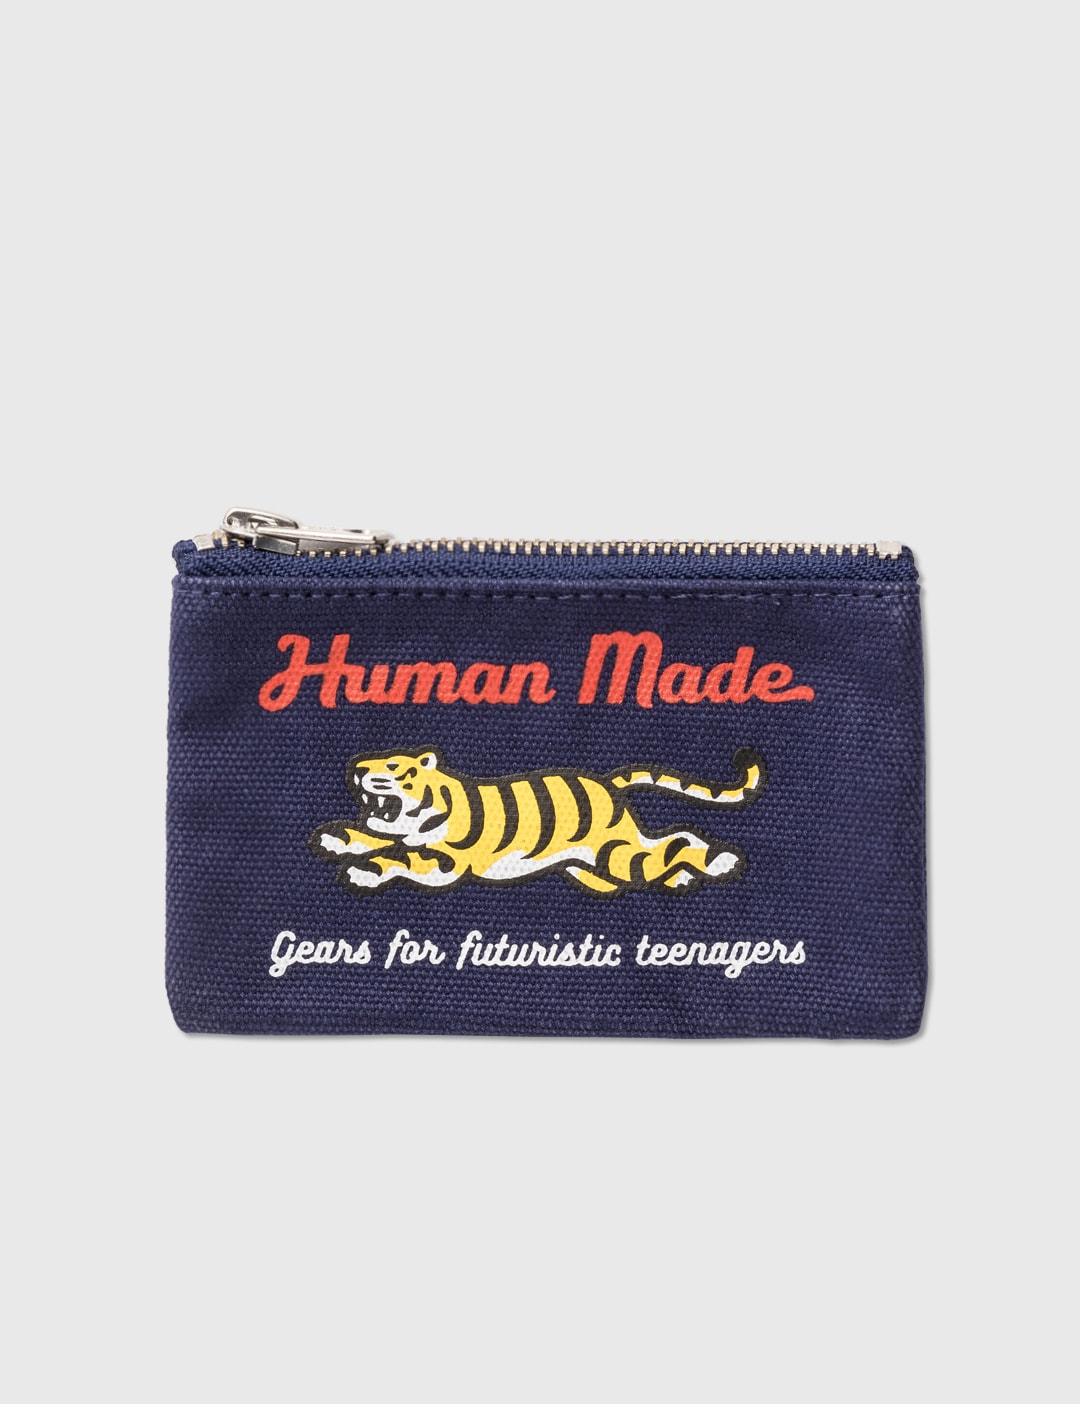 Shop HUMAN MADE Unisex Leather Small Wallet Logo Card Holders by MitaStyle